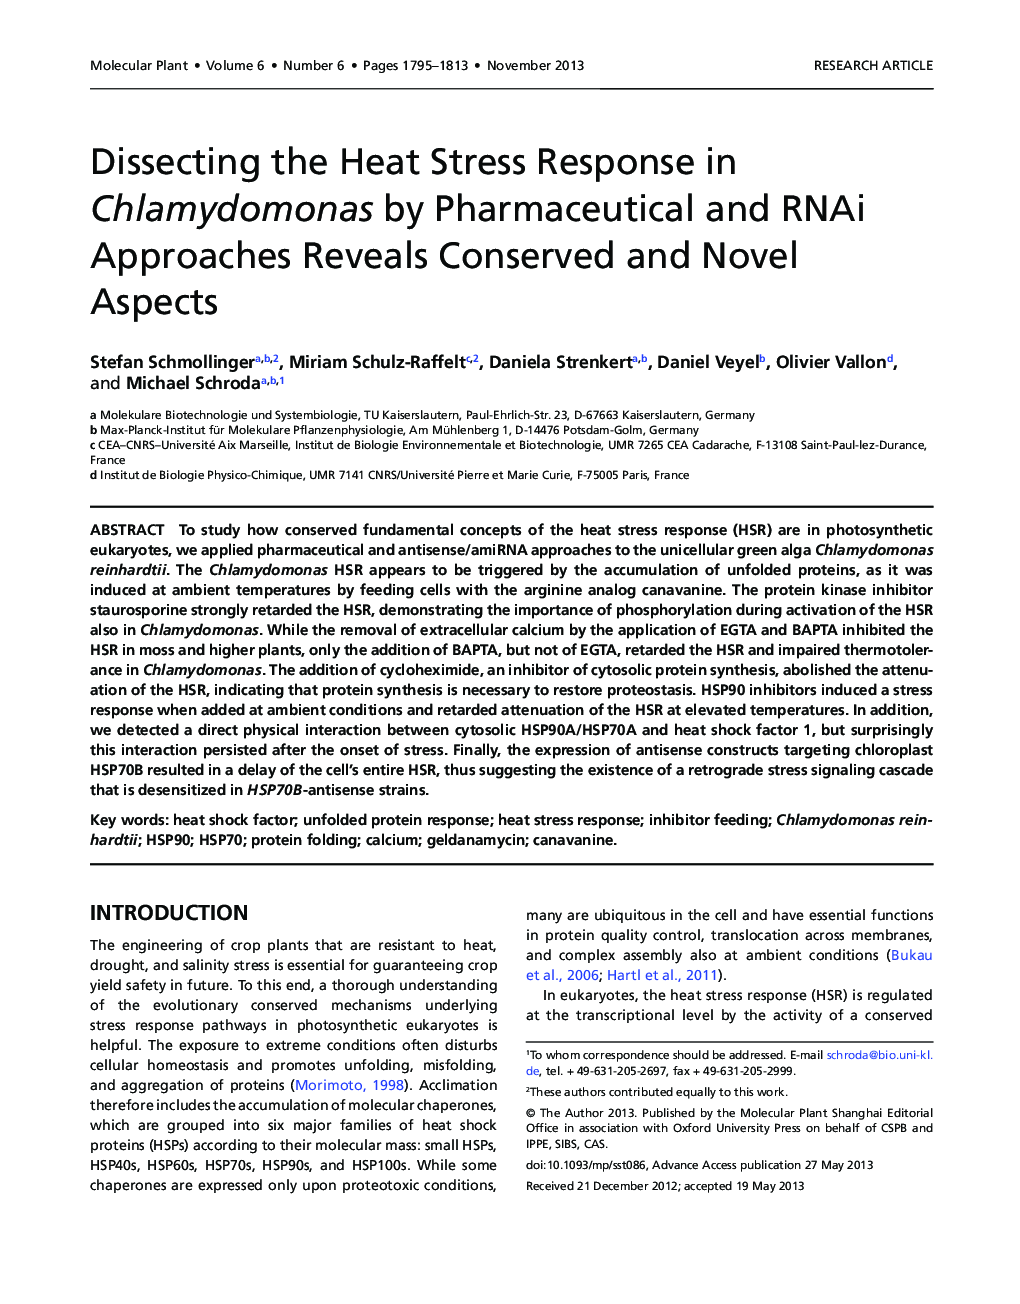 Dissecting the Heat Stress Response in Chlamydomonas by Pharmaceutical and RNAi Approaches Reveals Conserved and Novel Aspects 